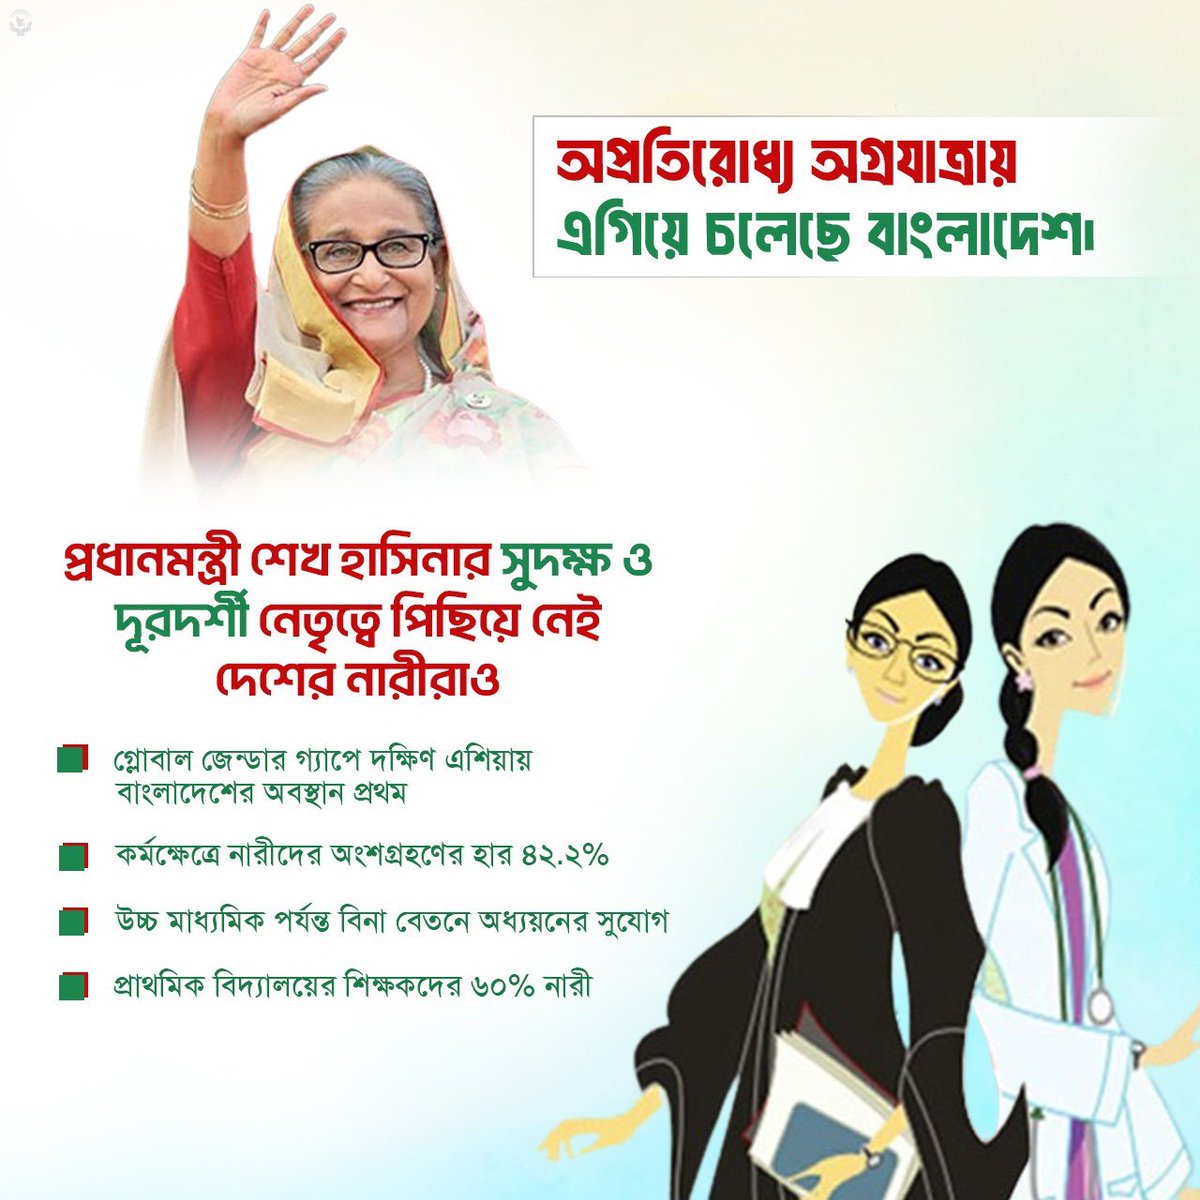 The women of the country are not lagging behind the skillful and visionary leadership of the Honorable Prime Minister Jannetri Sheikh Hasina. Bangladesh is moving forward with an unstoppable progress.

#Bangladesh #SmartBangladesh #Awamileague #OnceAgainSheikhHasina #Vision2041